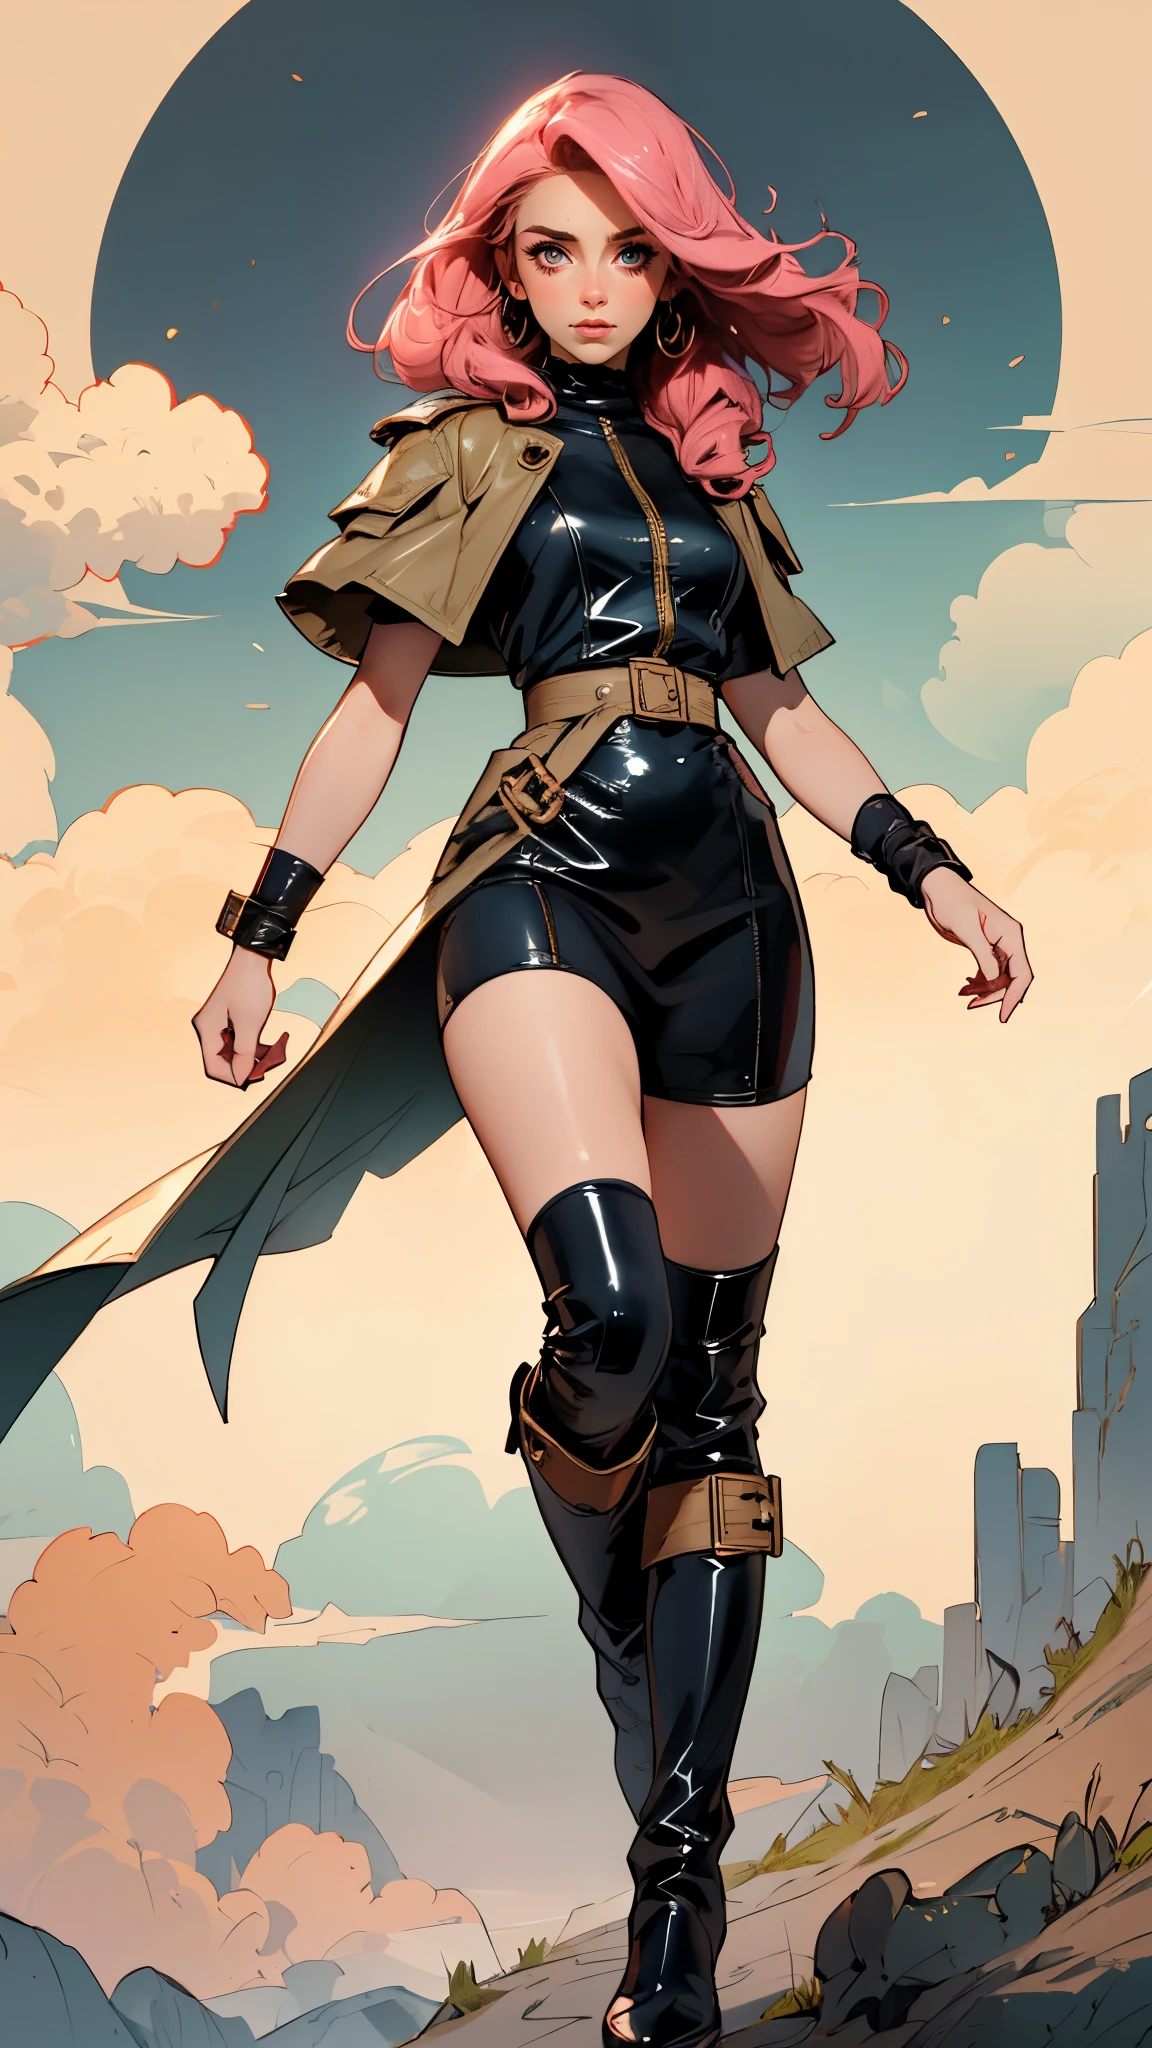 (A beautiful young girl with long curly pink hair, slender eyebrows, sparkling eyes, a bewildered expression, an oval-shapedl face with pale skin, a knee-length form-fitting leather trench coat with very short sleeves, she adorns both hands with metallic wrist guards in a sci-fi ancient civilization style, her long legs are clad in leather boots as she soars through the misty clouds), this character embodies a finely crafted fantasy-realism style western ranger in anime style, exquisite and mature manga art style, porcelain skin, perfect skin, perfect eyes, (Alison Brie:1.2), high definition, best quality, highres, ultra-detailed, ultra-fine painting, extremely delicate, professional, anatomically correct, symmetrical face, extremely detailed eyes and face, high quality eyes, creativity, RAW photo, UHD, 32k, Natural light, cinematic lighting, masterpiece-anatomy-perfect, masterpiece:1.5